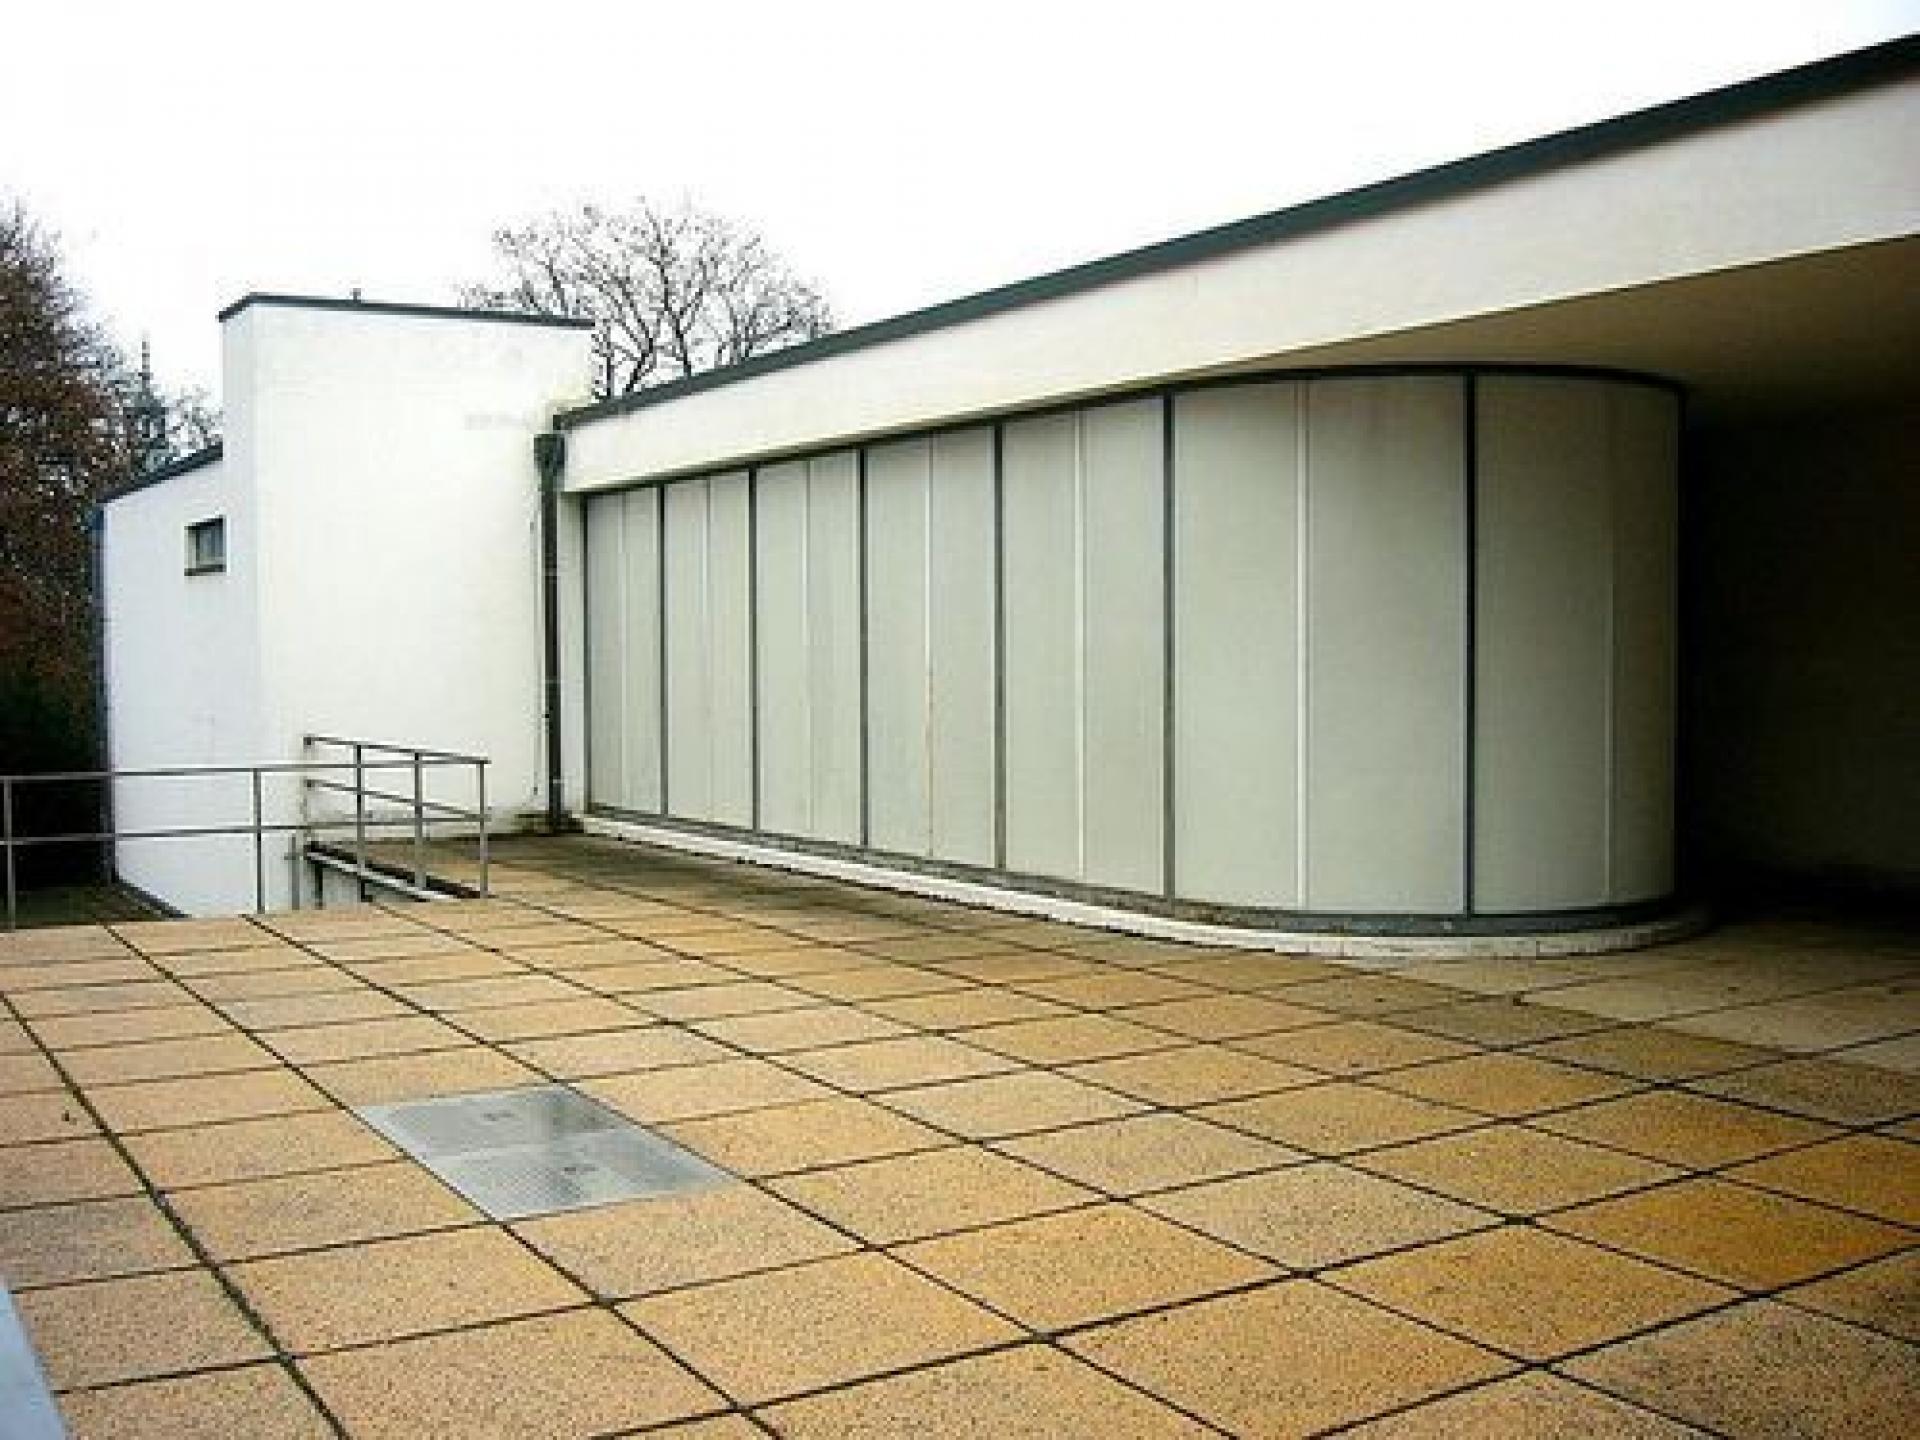 Villa Tugendhat in Brno by Ludwig Mies van der Rohe